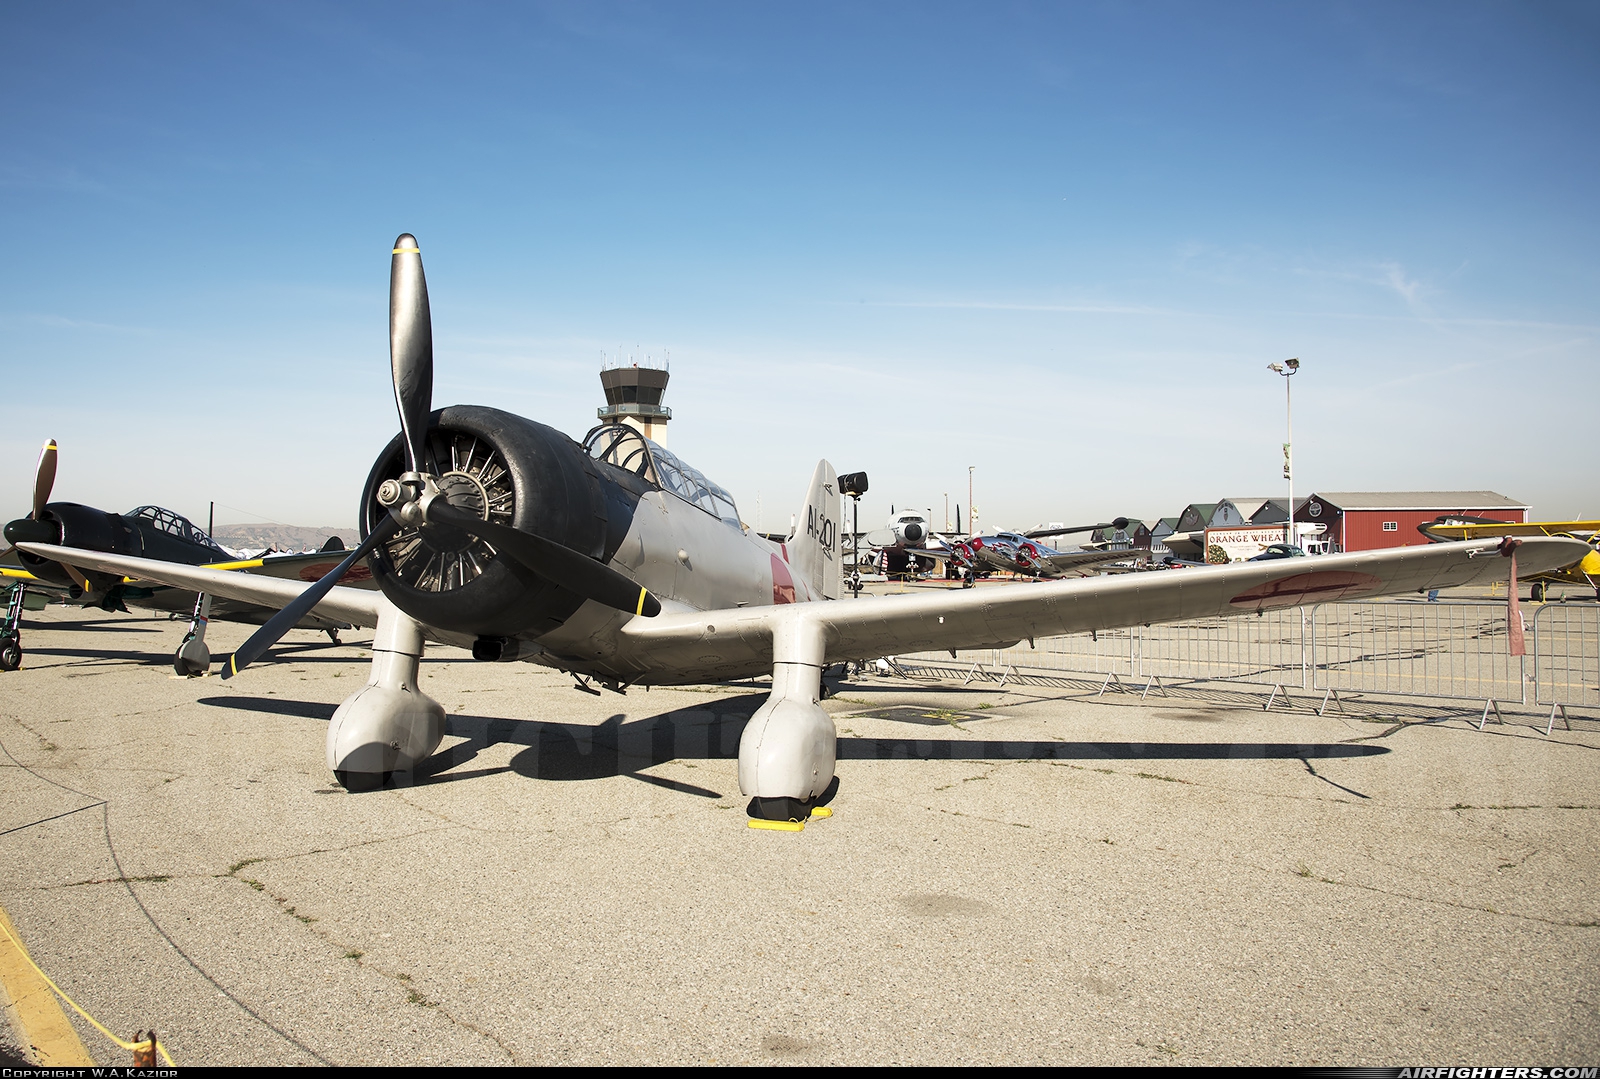 Private - Planes of Fame Air Museum Vultee Aircraft BT-15 Valiant NX67629 at Chino (CNO), USA